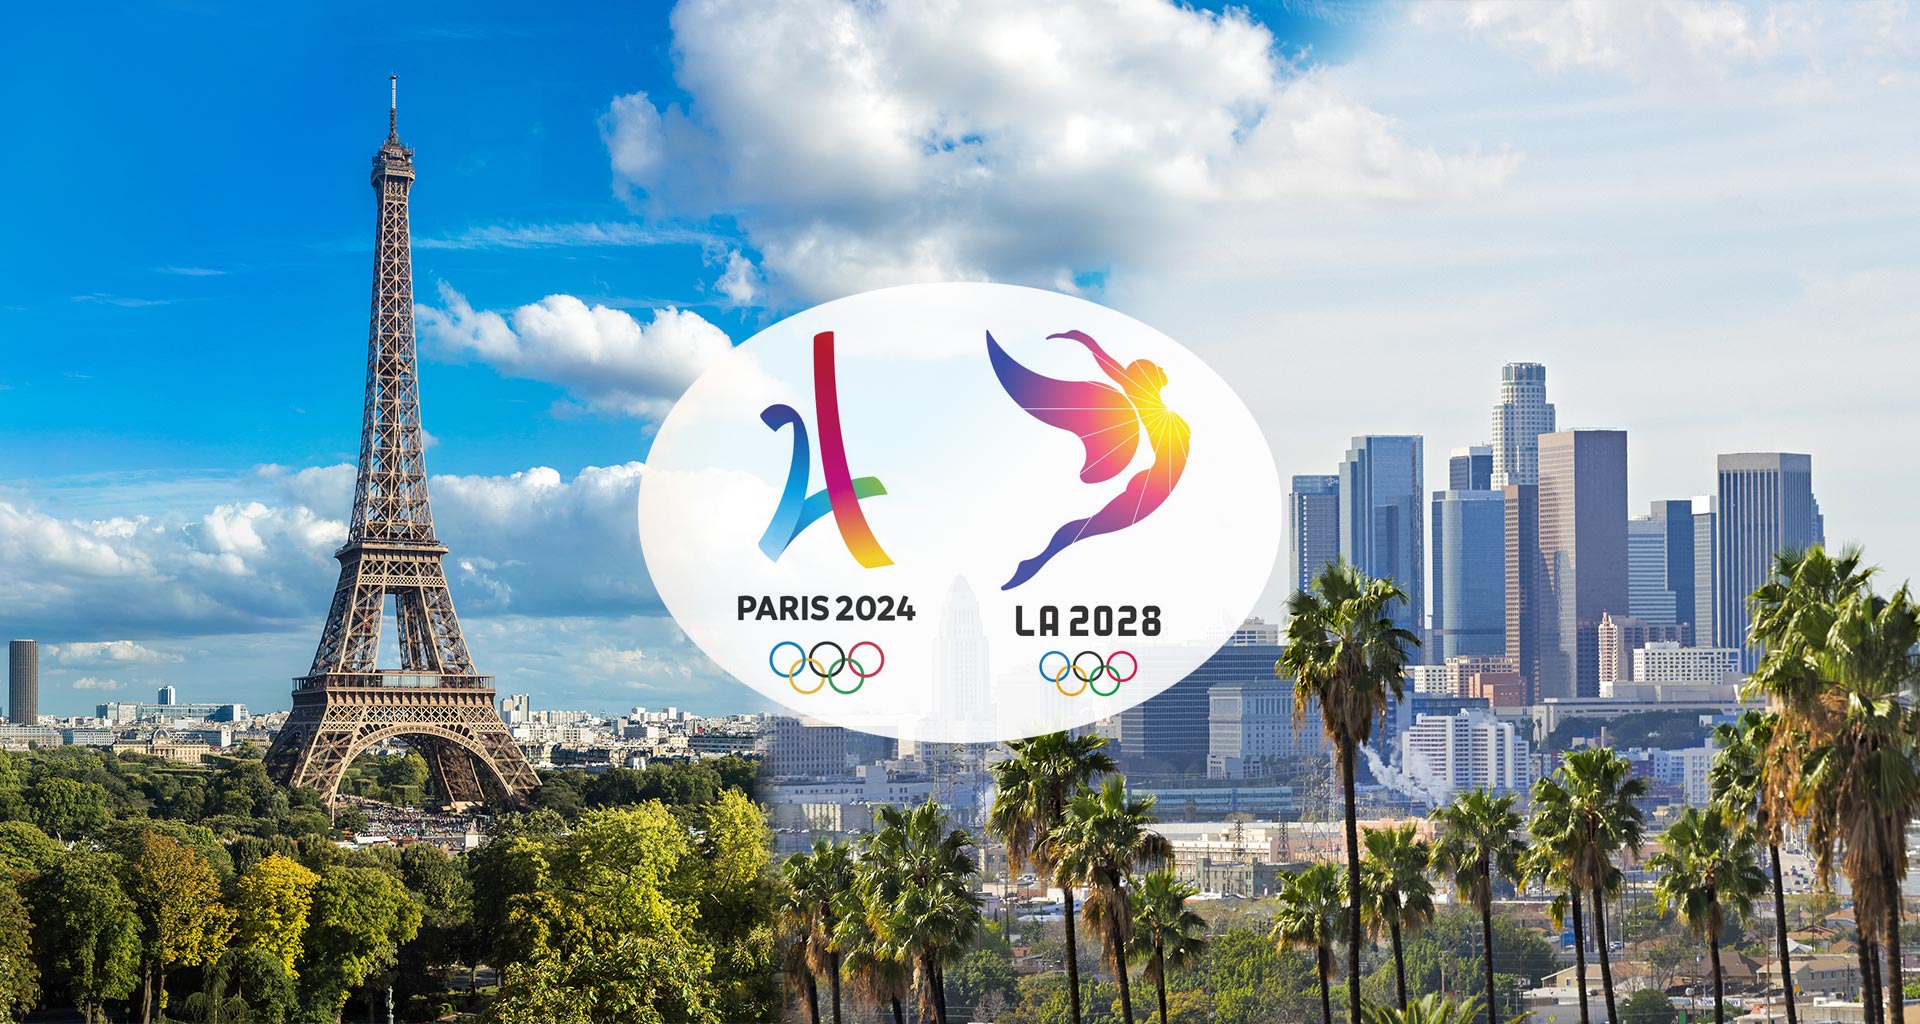 Paris And Los Angeles Will Host The 2024 And 2028 Olympic Games